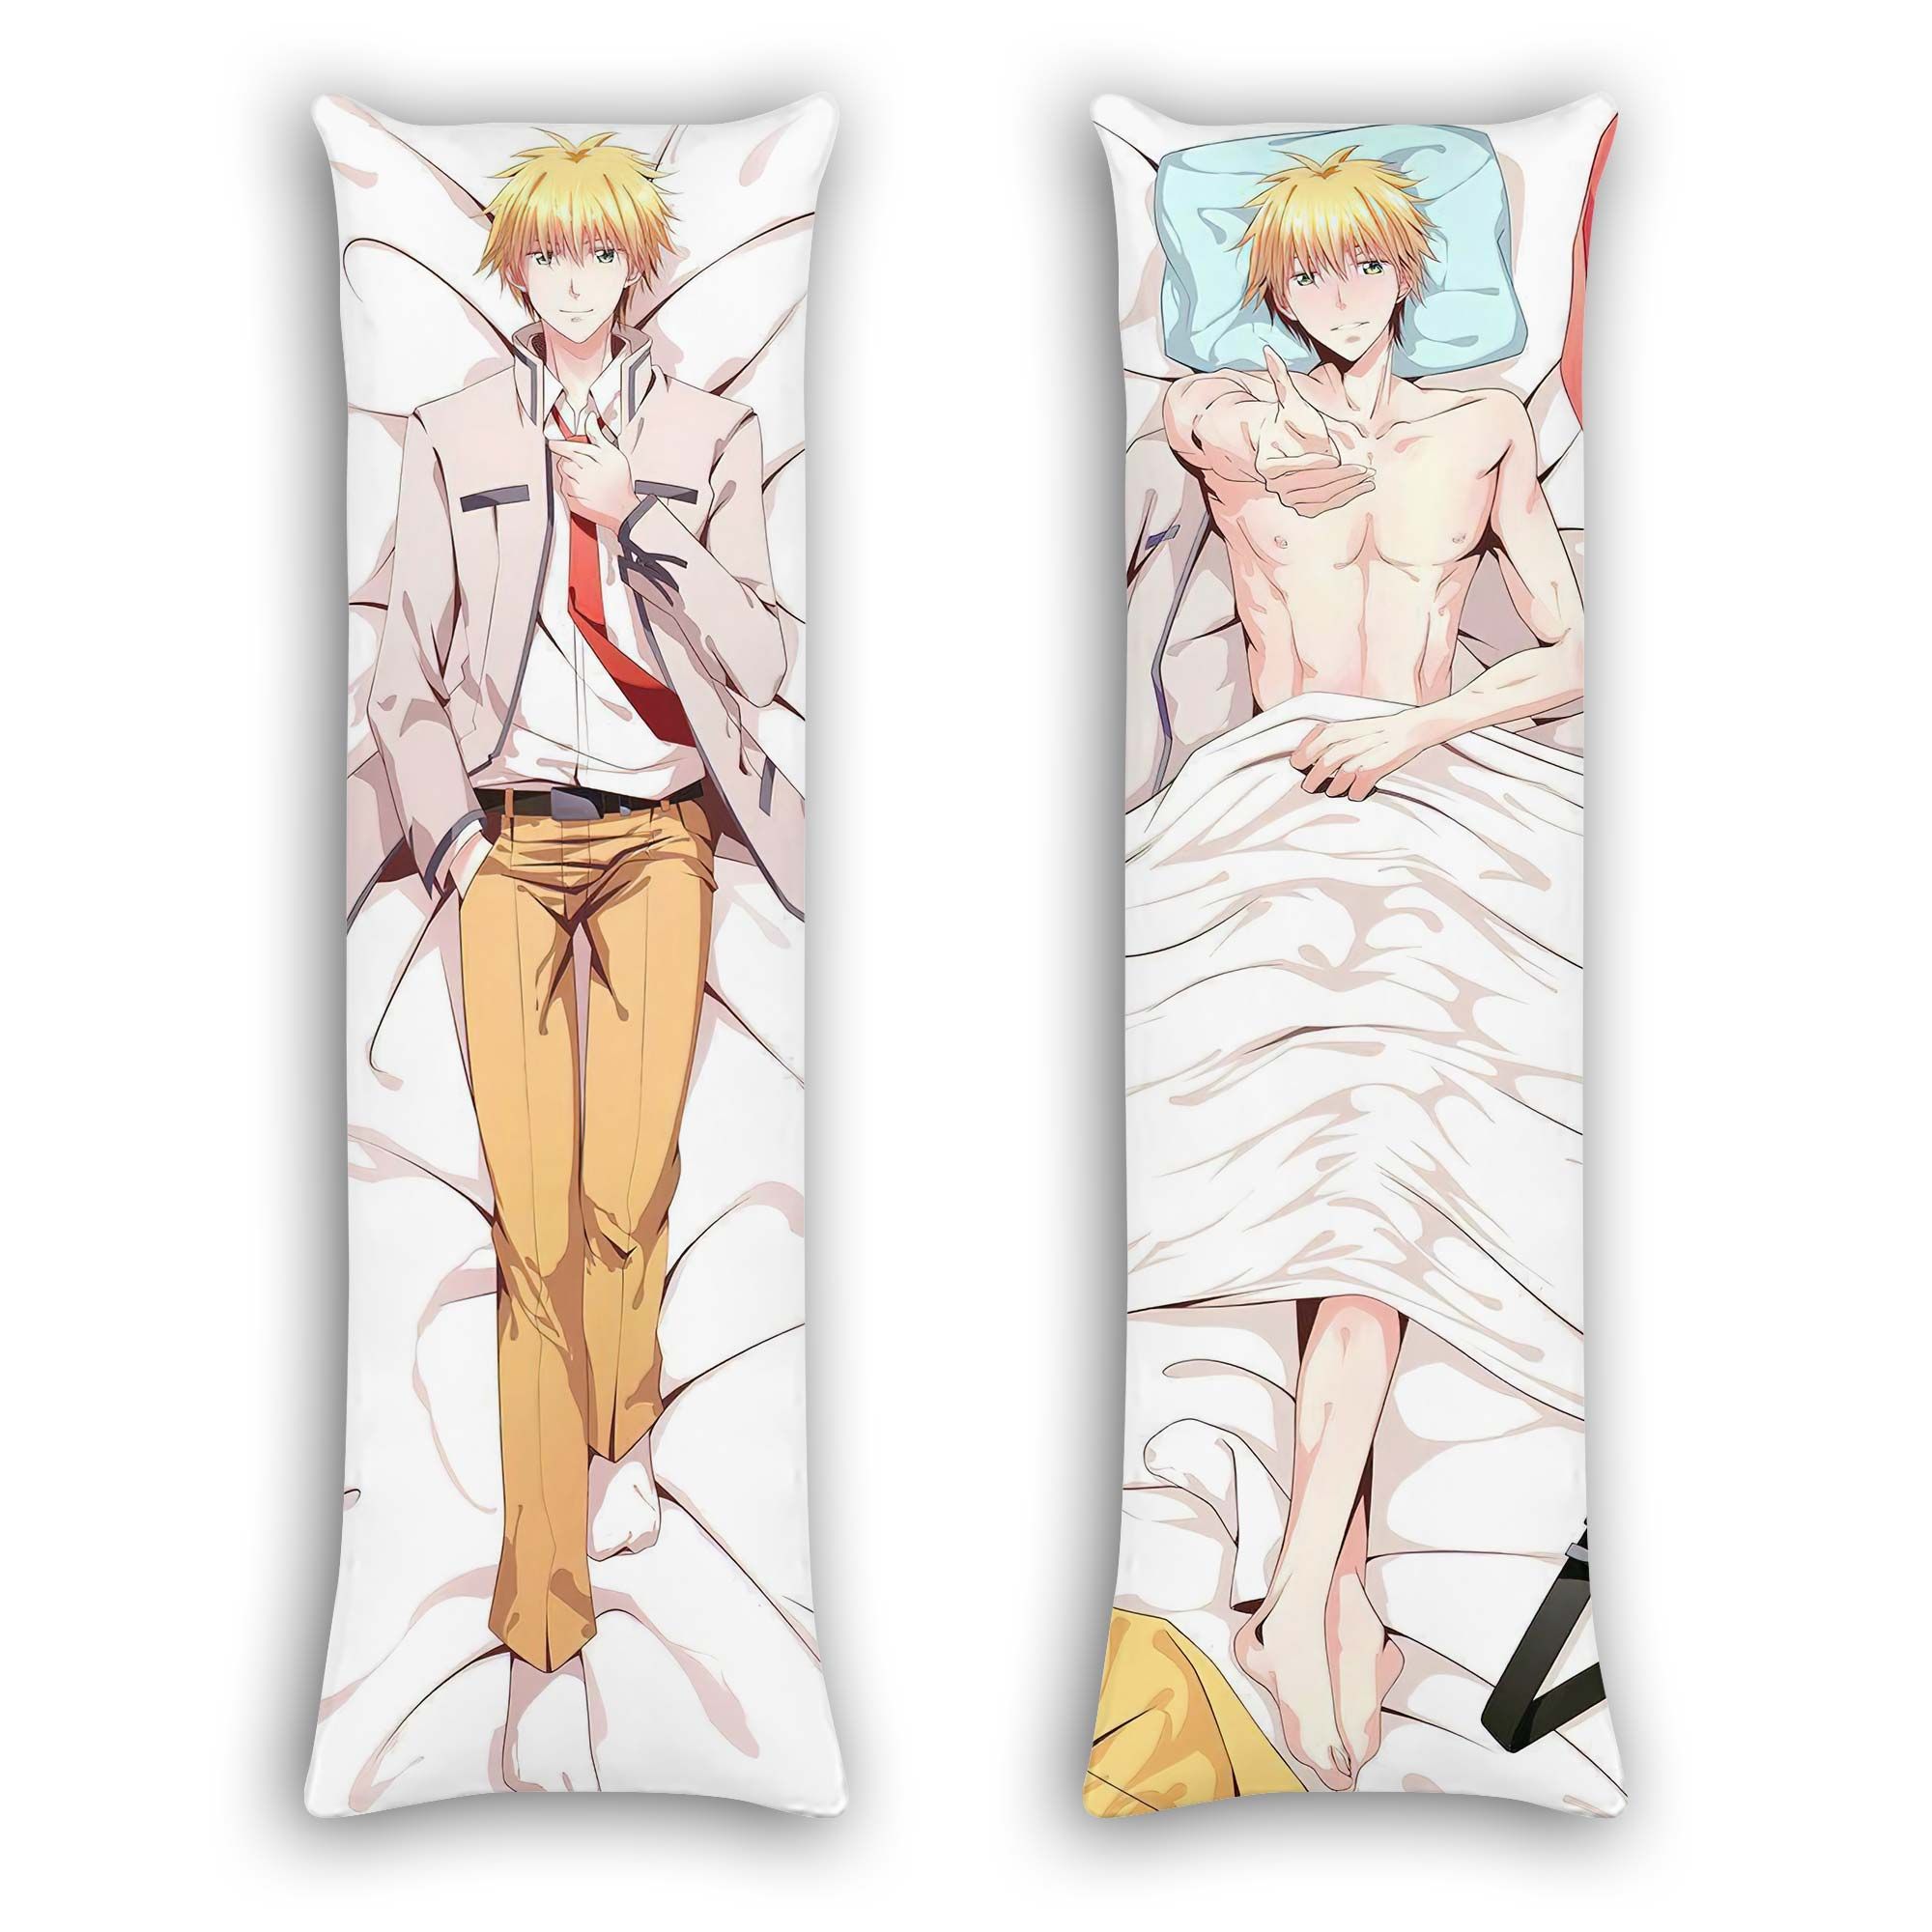 Gear Otaku Exclusive Clothing and All Over Printed Shirts Body Pillow Cover...